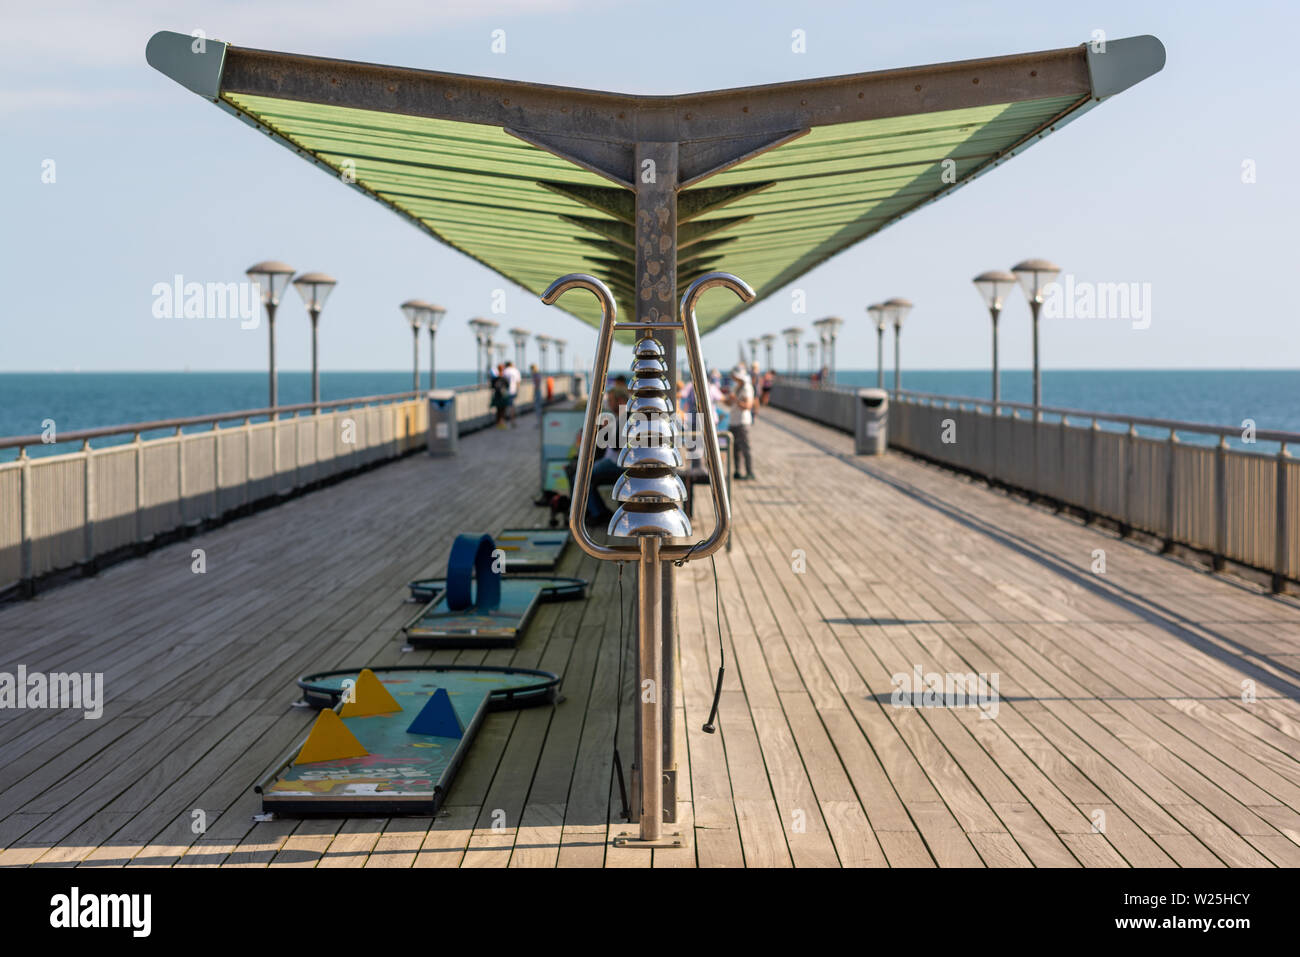 Renovated Victorian pier at Boscombe, Dorset, England, UK, has a collection of steel percussion instruments for the public to use. Stock Photo